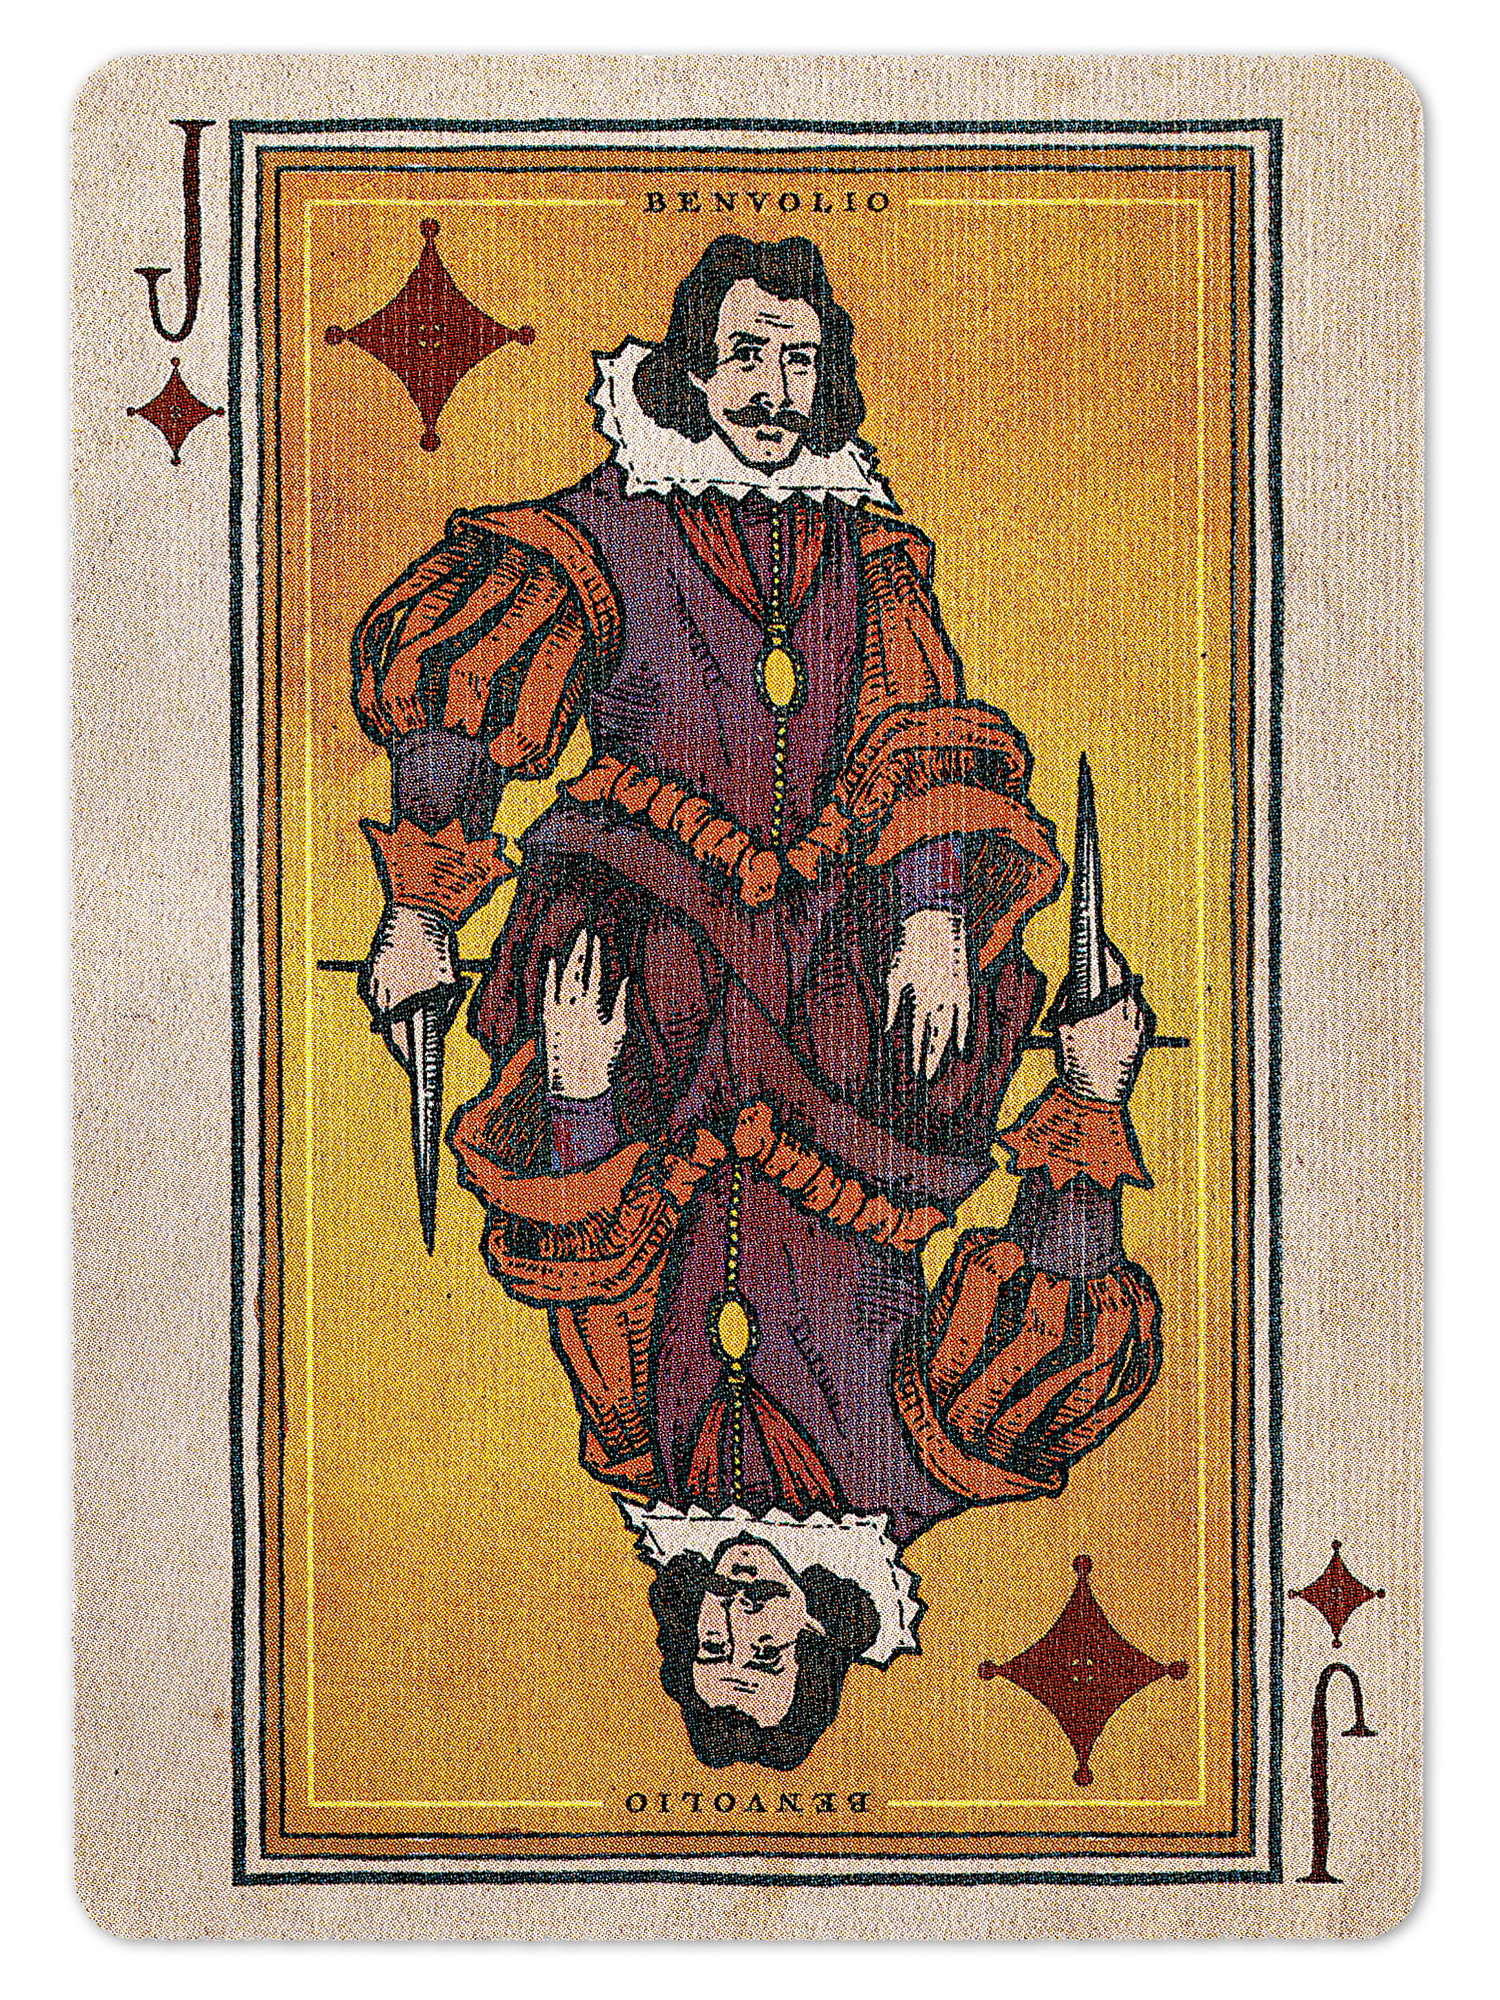 I Love Las Vegas PLAYING CARDS – King Polly